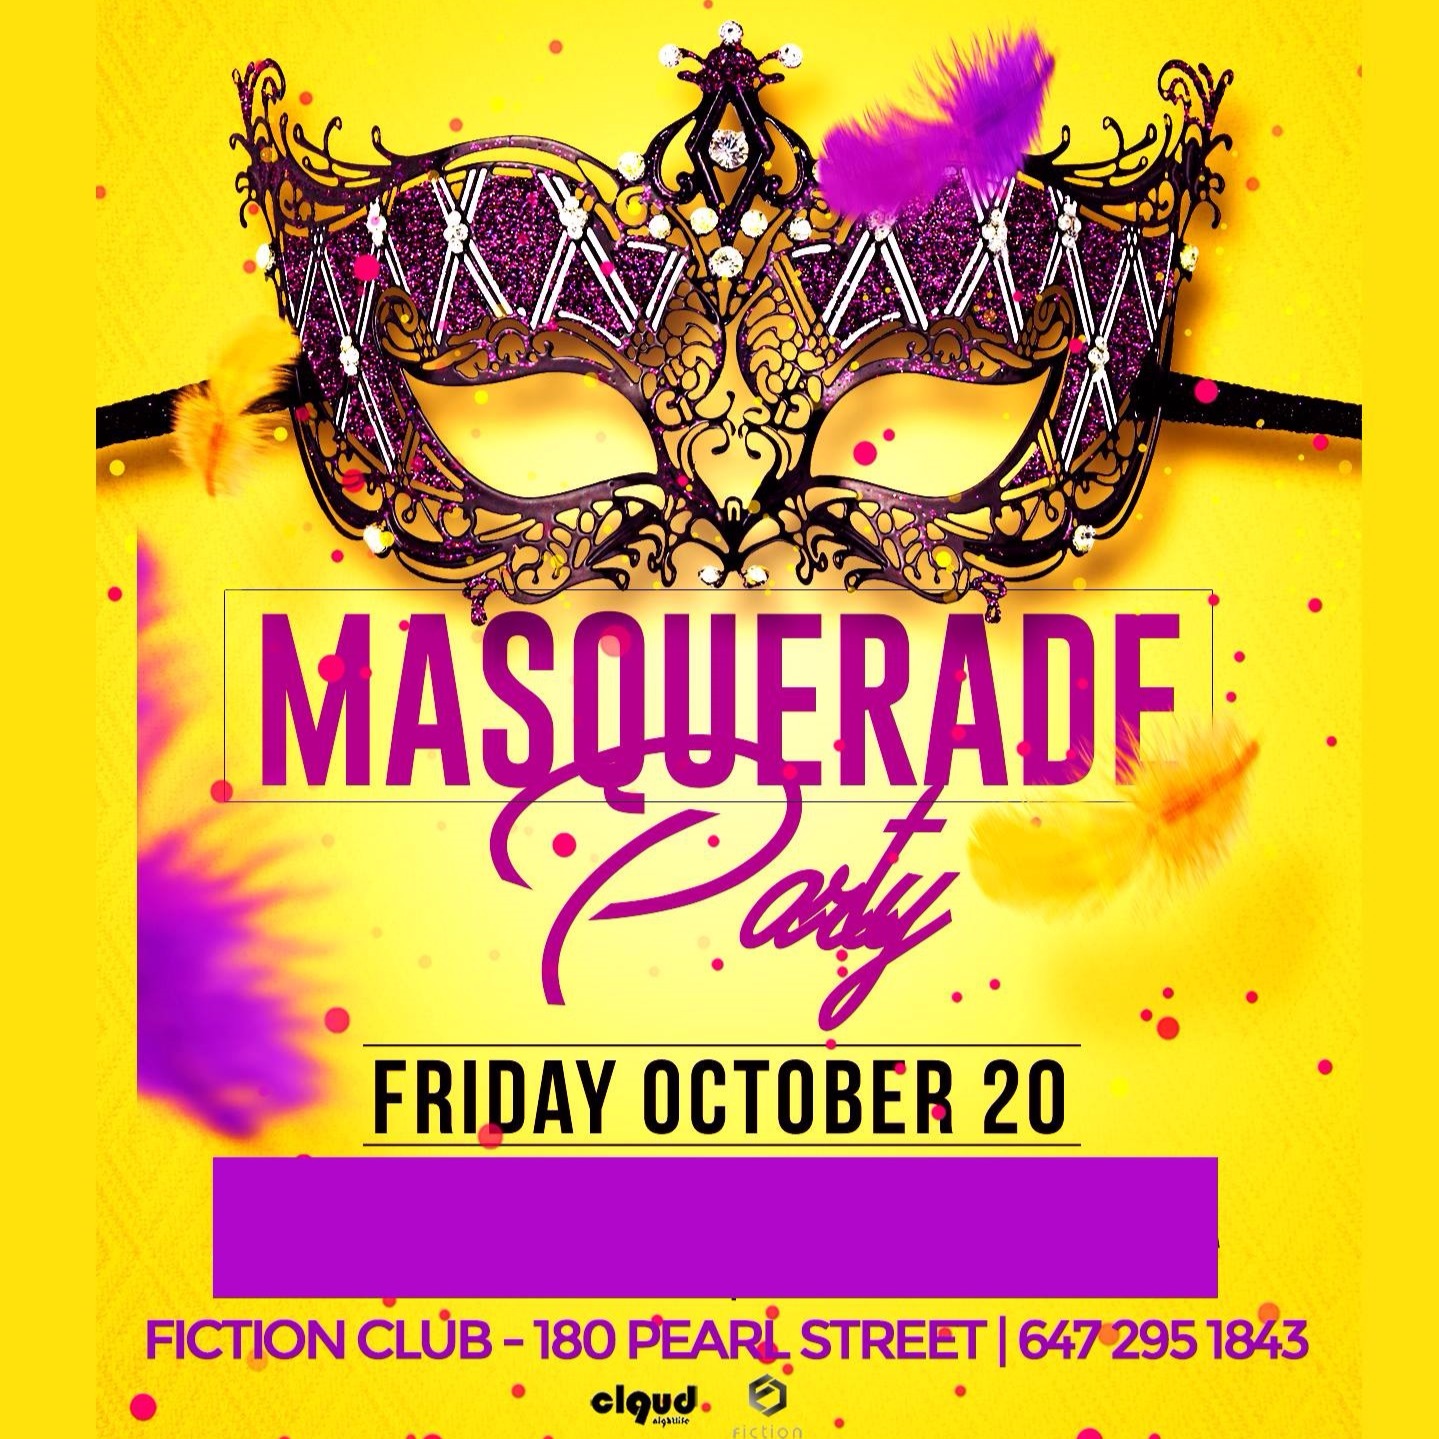 Masquerade Party @ Fiction | Fri Oct 20 | 1000+ People & Complimentary Mask